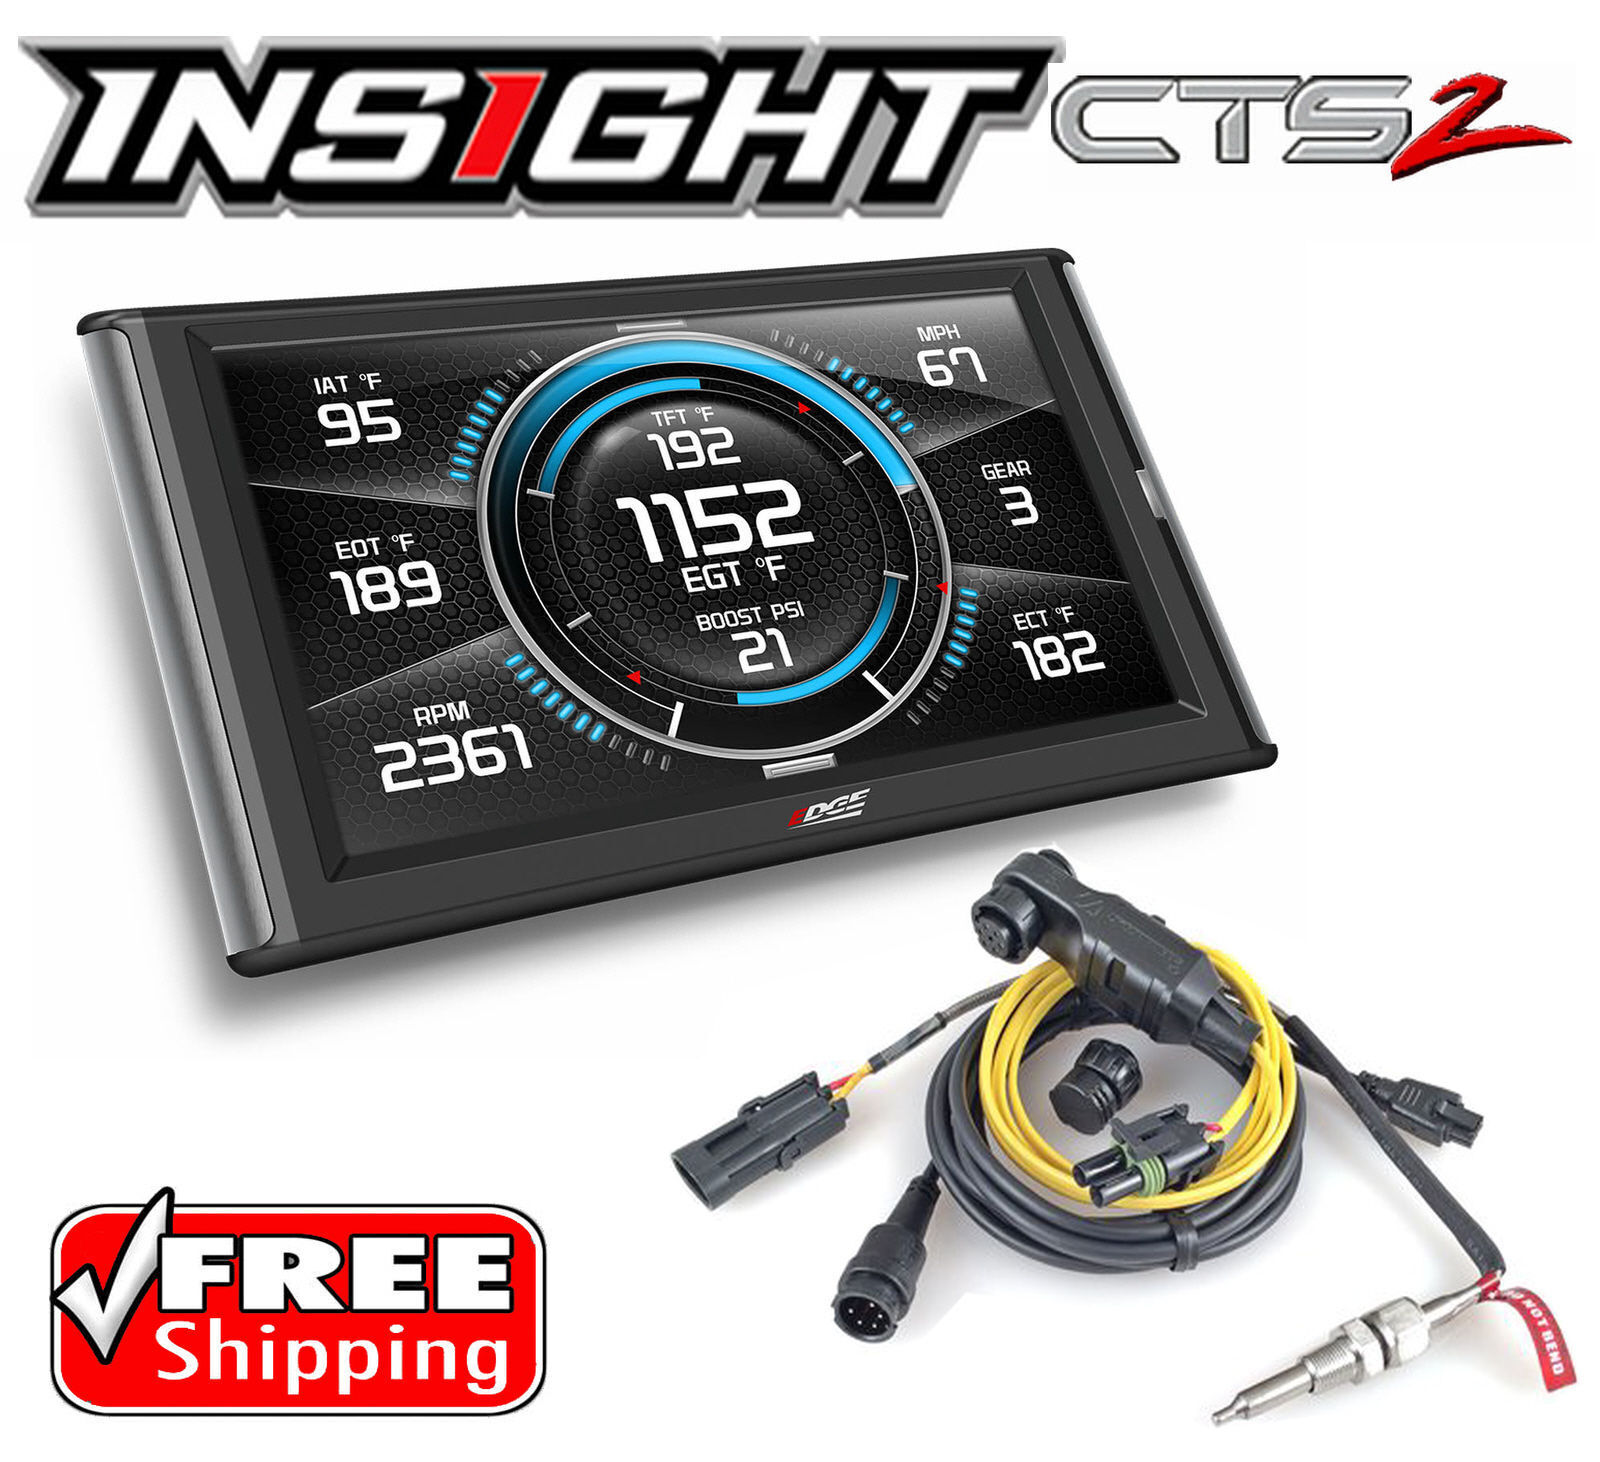 Edge Products Insight CTS2 84130 Touch Screen Monitor & Gauge incl EAS EGT Probe